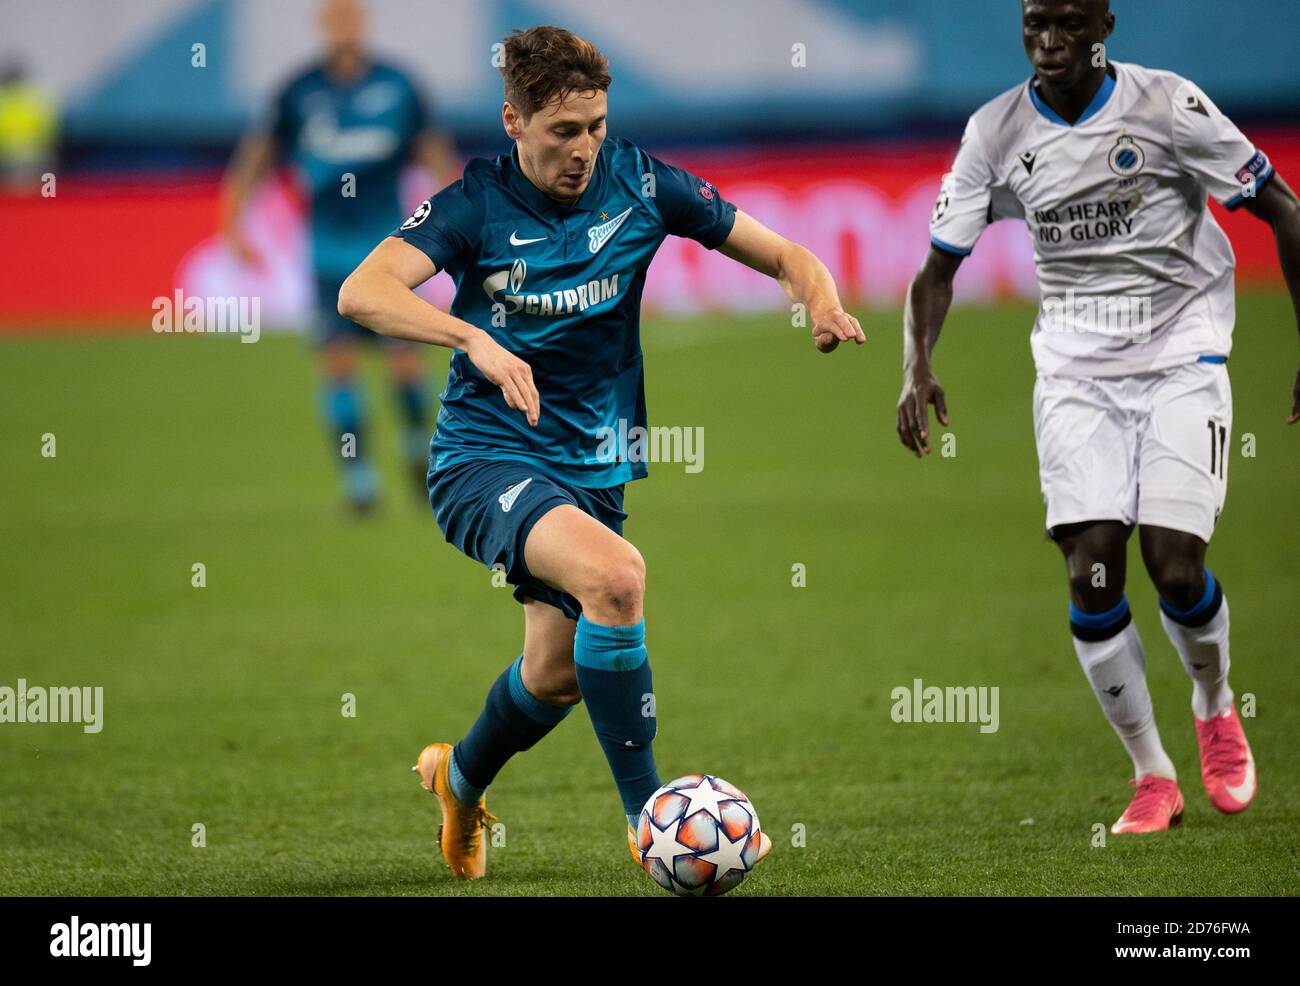 SAINT-PETERSBURG, RUSSIA - OCTOBER 20: Daler Kuzyayev of Zenit St Petersburg during the UEFA Champions League Group F match between Zenit St Petersburg and Club Brugge KV at Gazprom Arena on October 20, 2020 in Saint-Petersburg, Russia [Photo by MB Media] Stock Photo